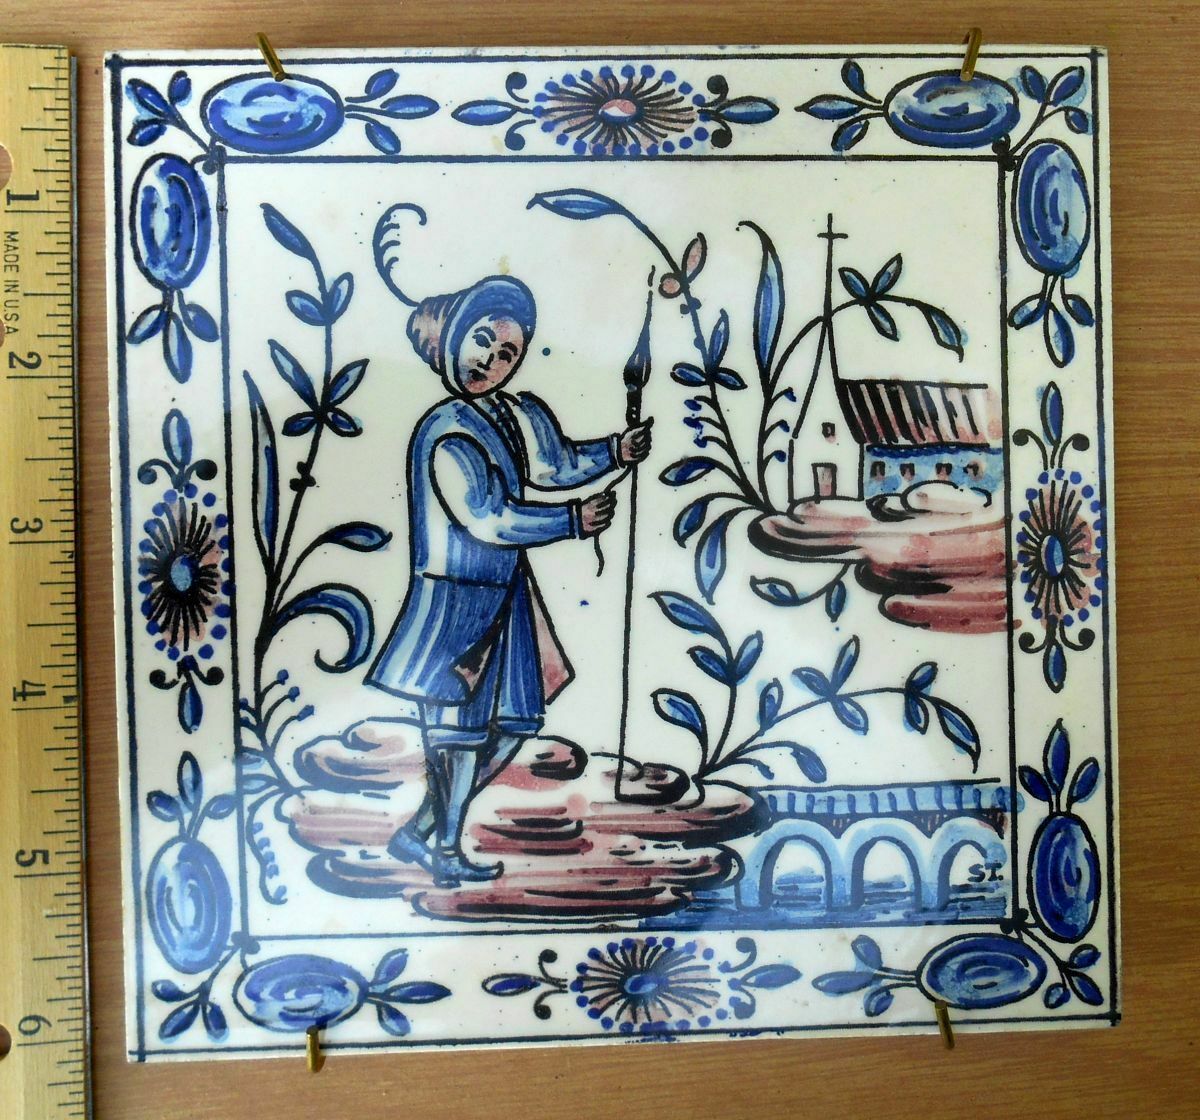 Outeiro Agueda Portugese Ceramic Tile 6 X 6 X 3/16 Medieval Style Hand-painted